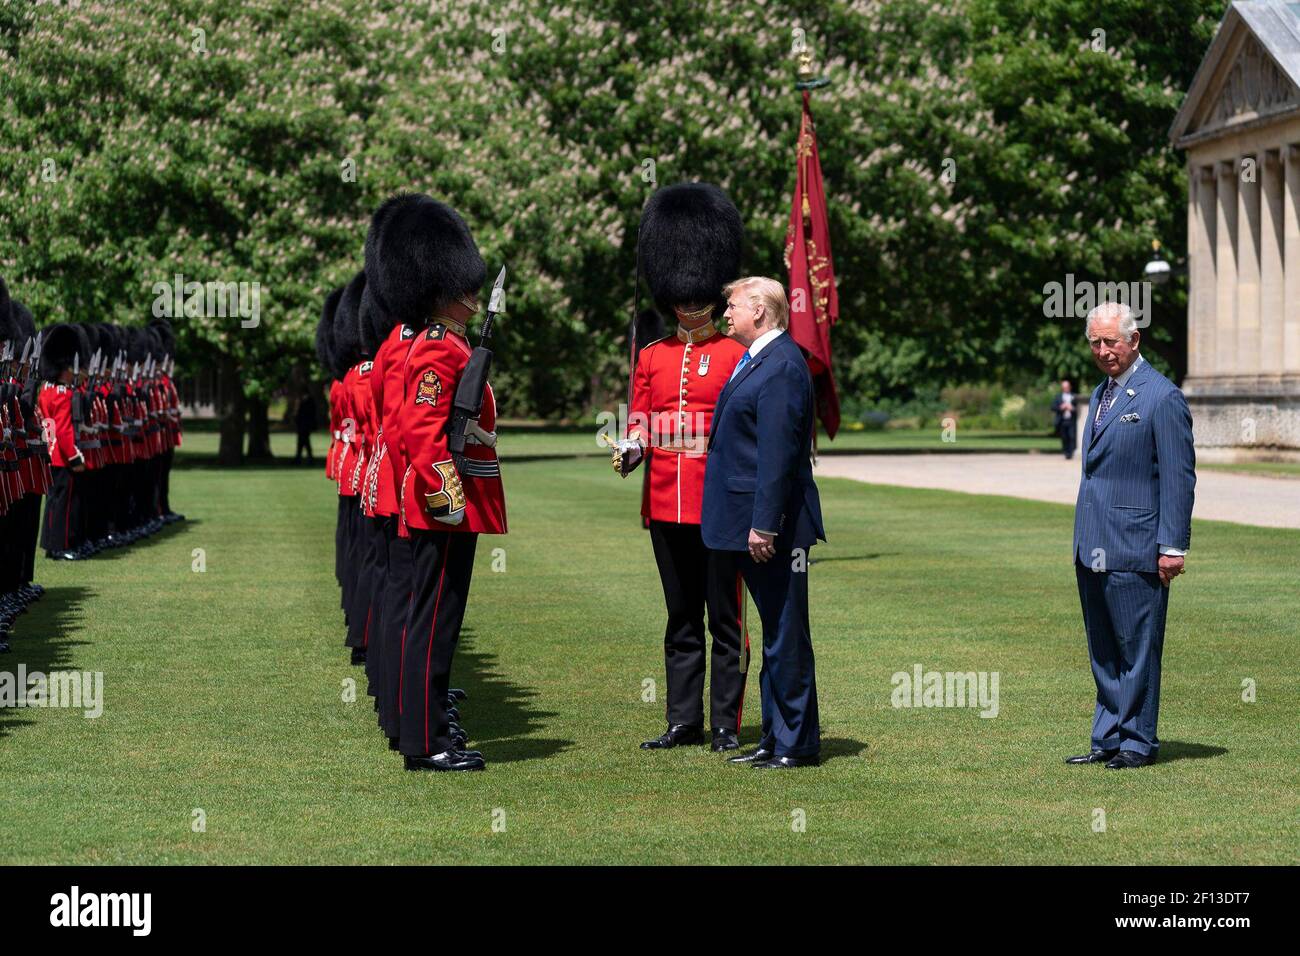 President Donald Trump joined by the Prince Charles inspects the Guard of Honor during the official welcome ceremony at Buckingham Palace Monday June 3 2019 in London. Stock Photo